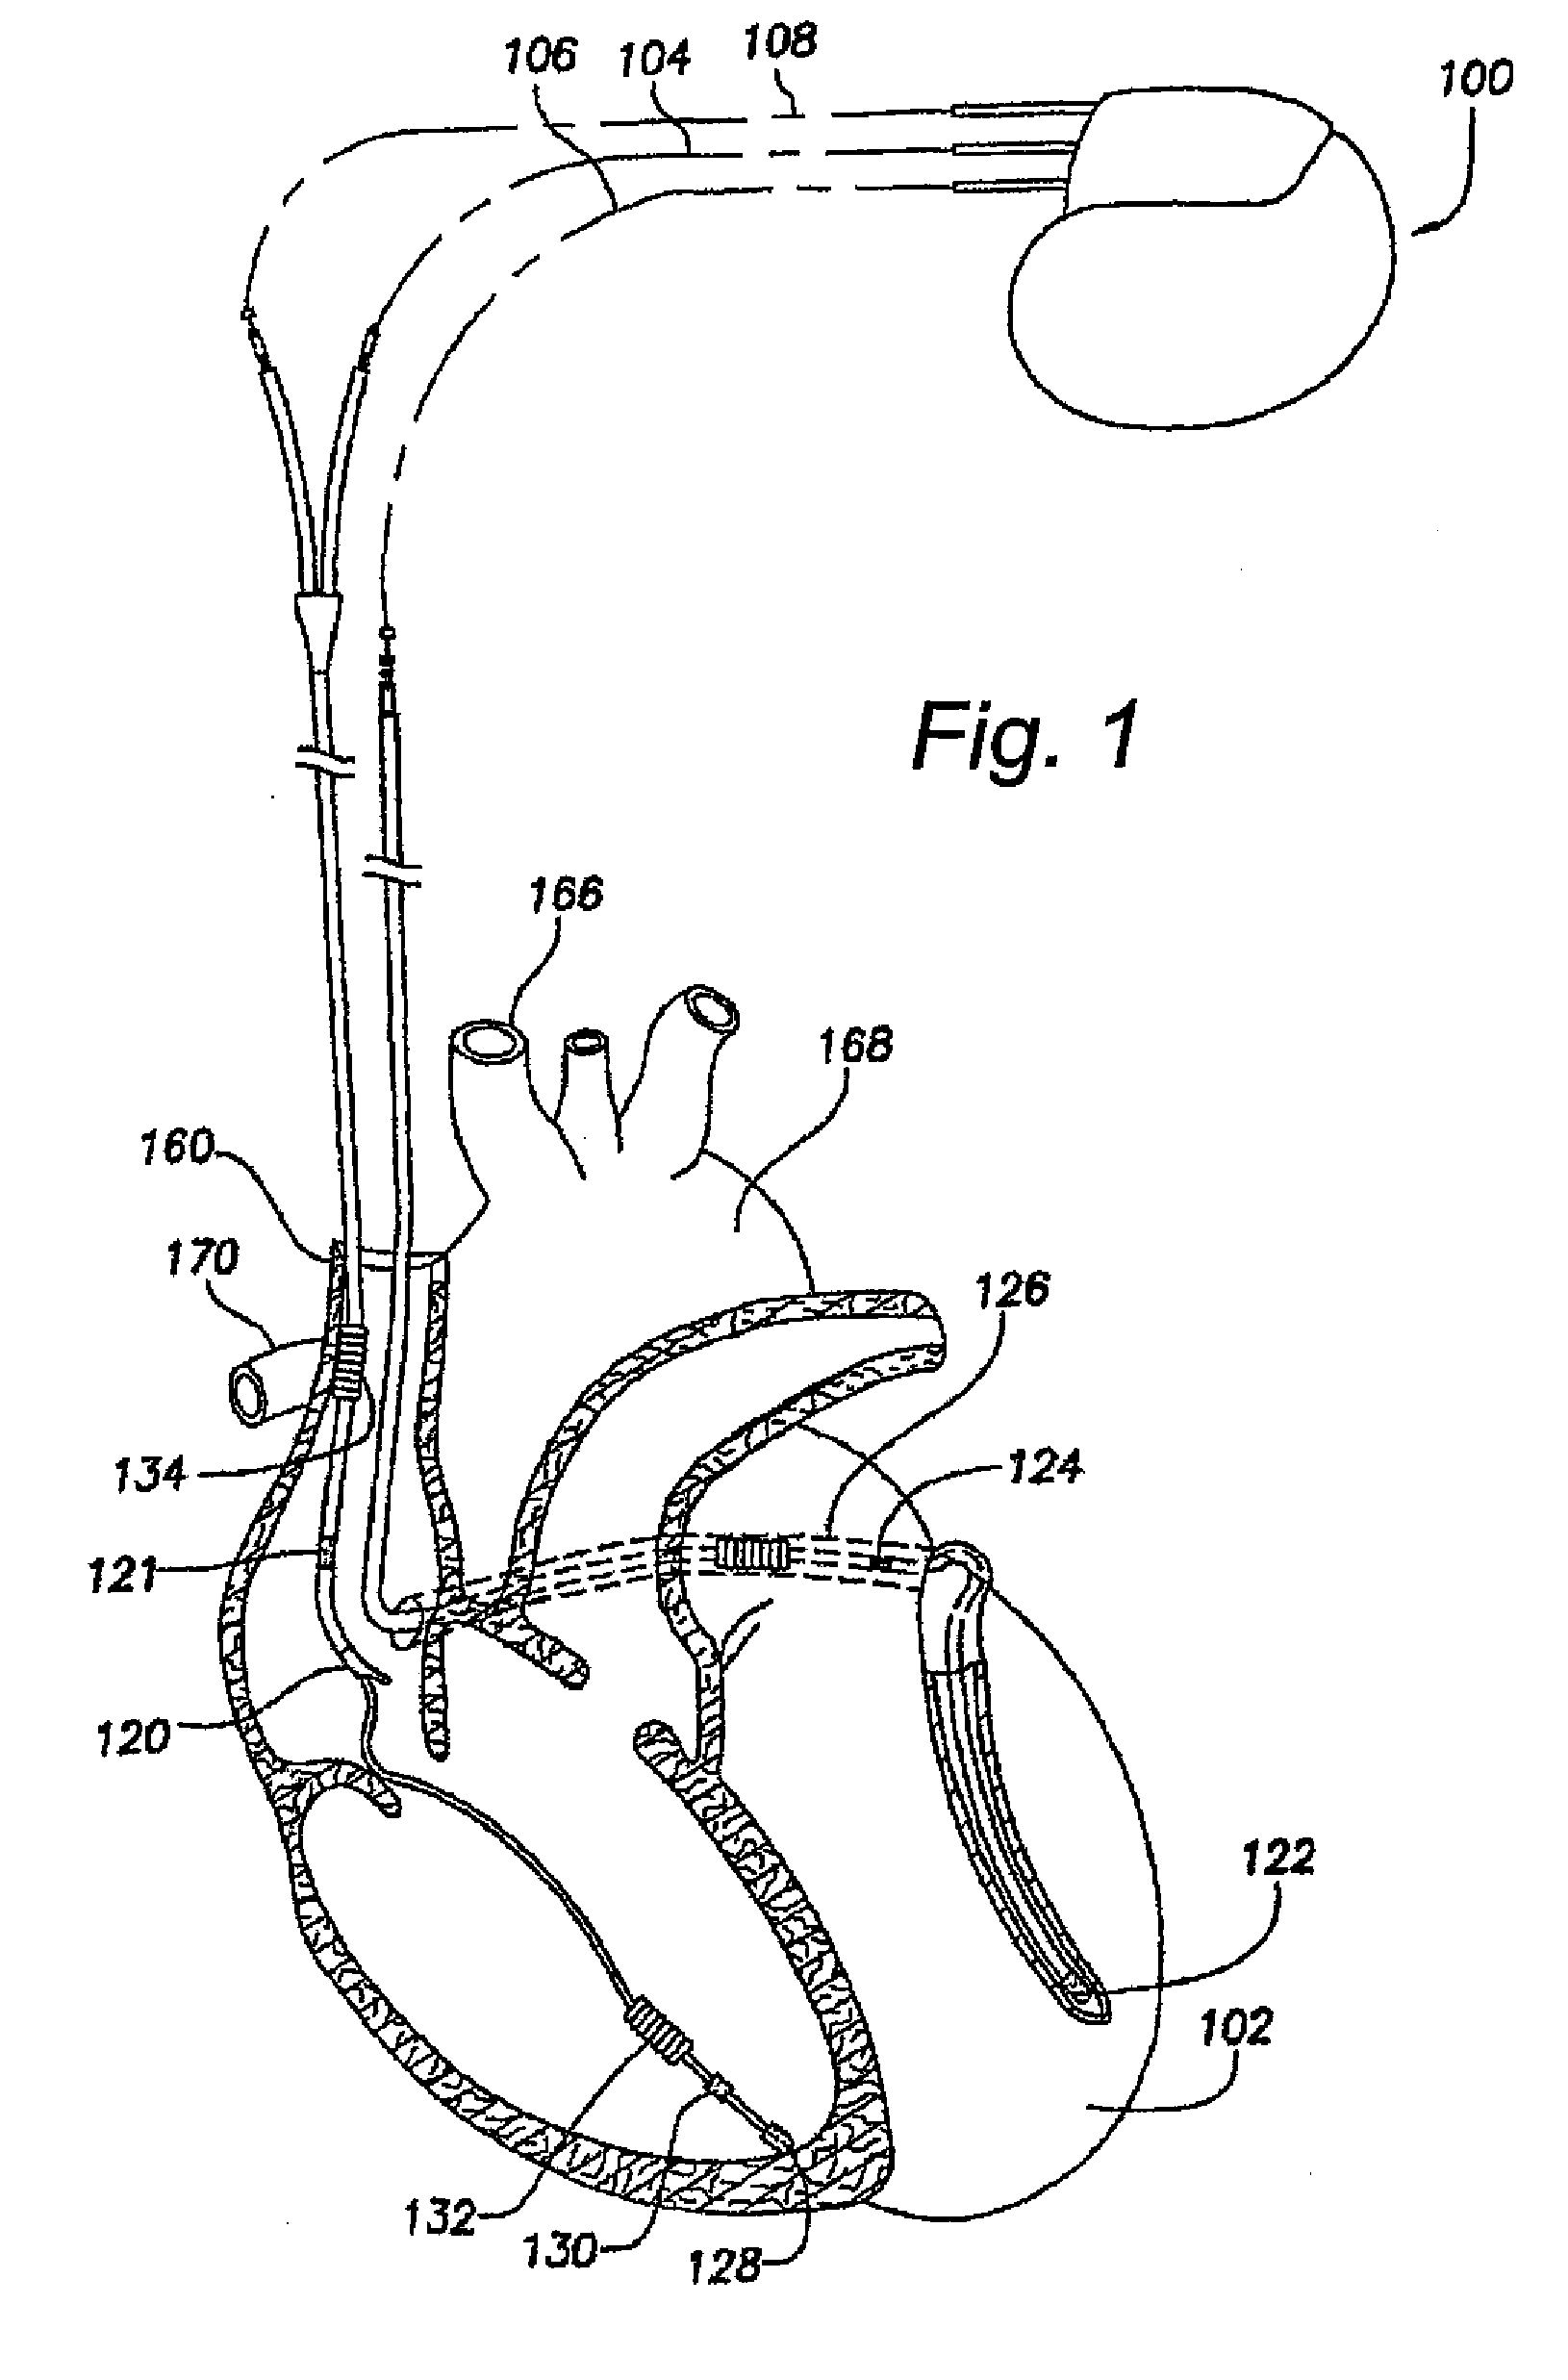 System and method for controlling a heart stimulator